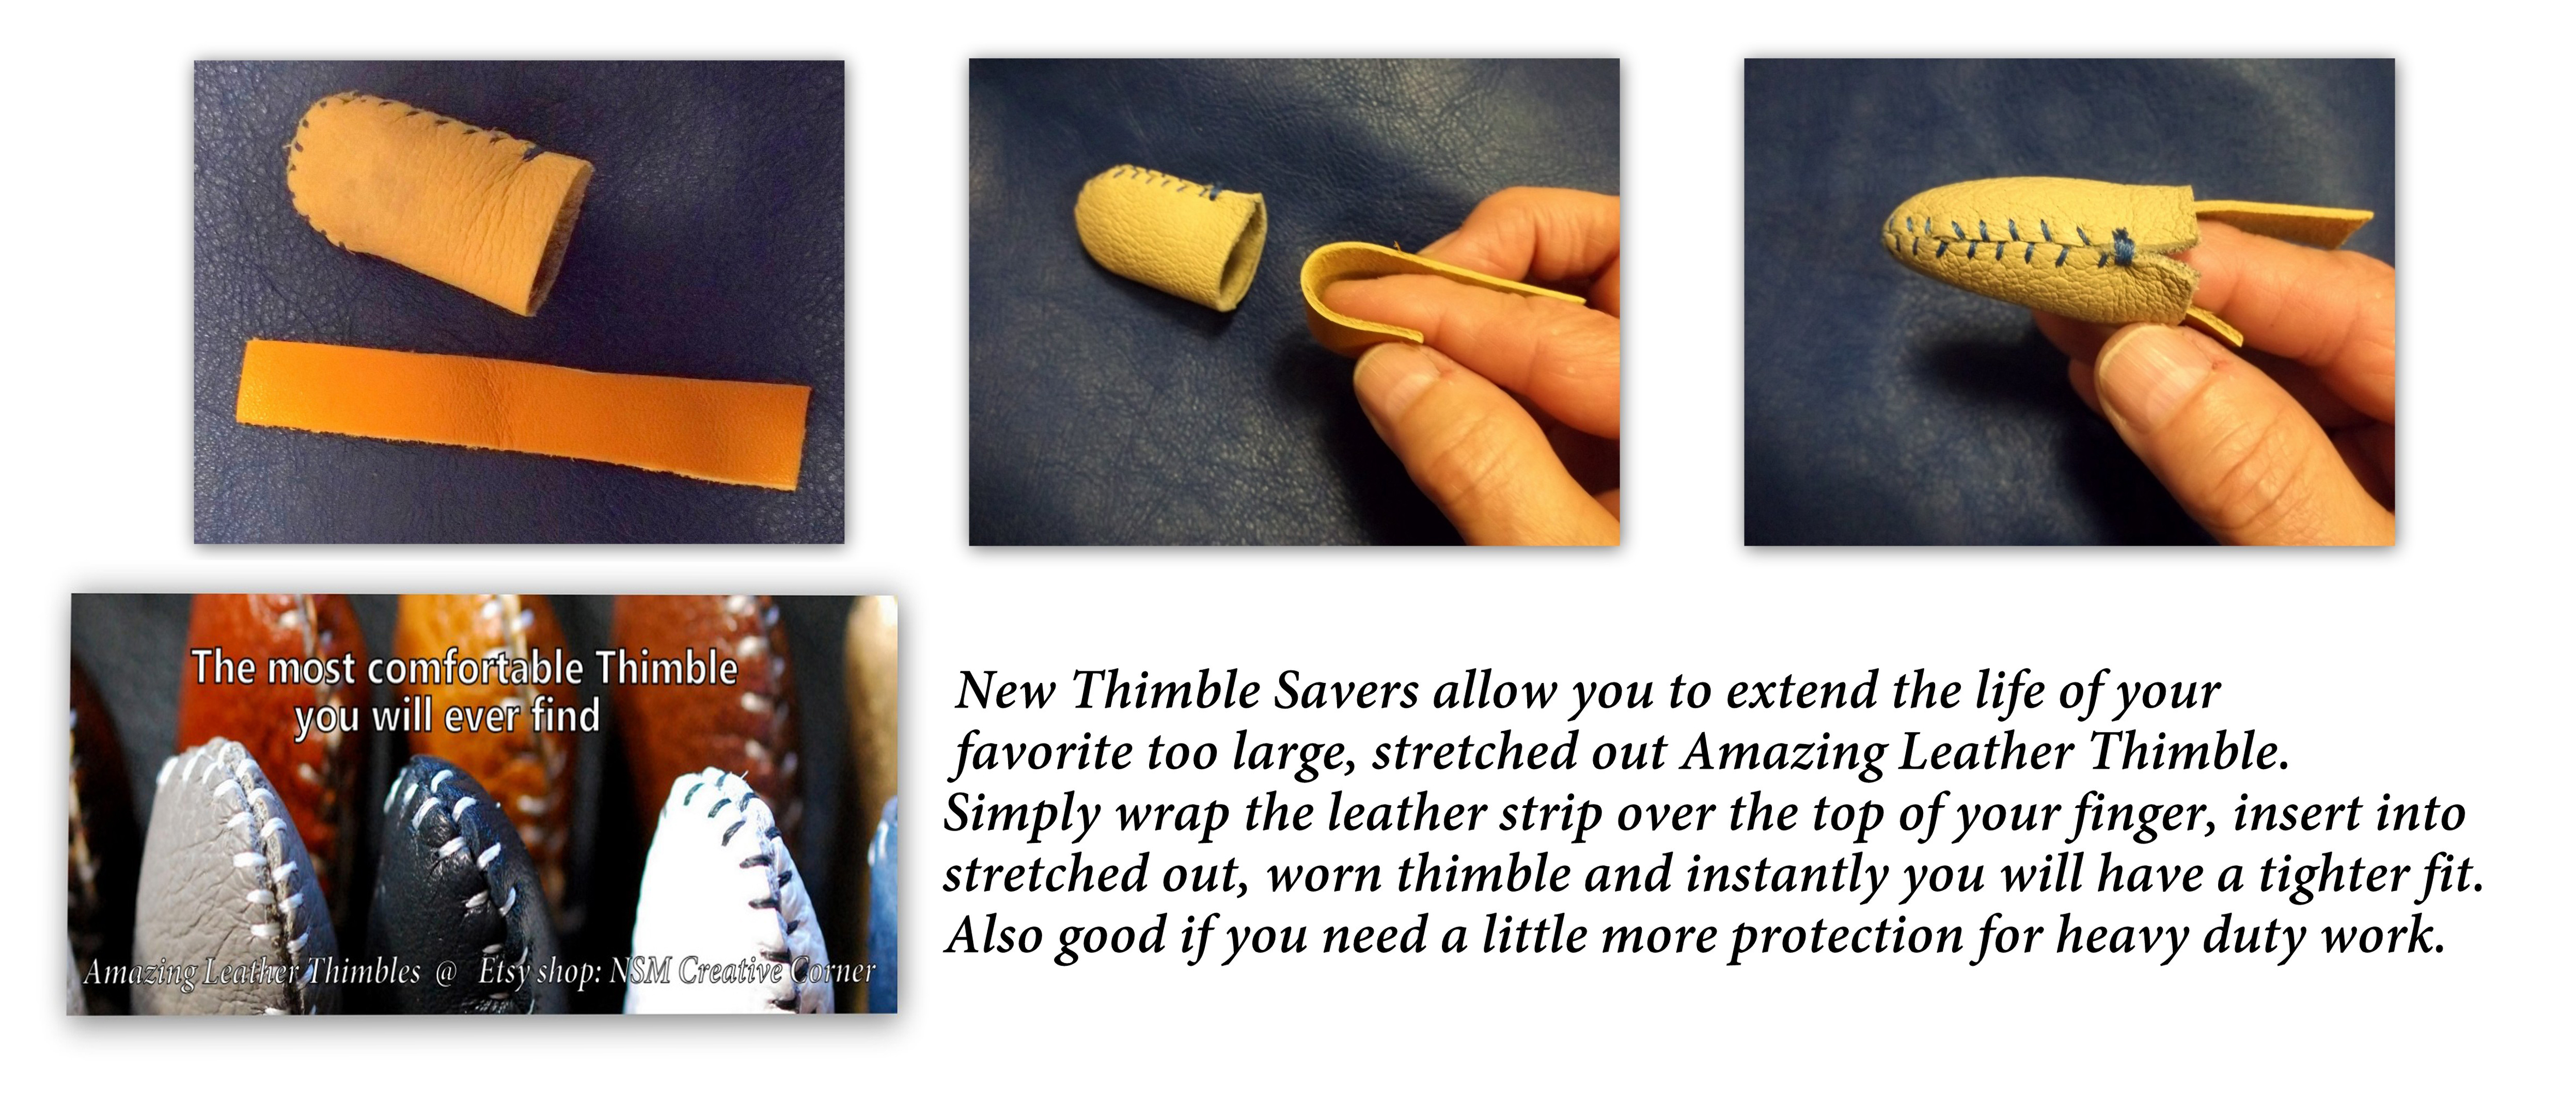 Handmade Supplies :: Sewing & Fiber :: Sewing Tools & Supplies :: Amazing  Handmade Leather Sewing Thimble© Choose sizes/colors & leather weight.  Custom made for sewing, crafting, needleart finger protection